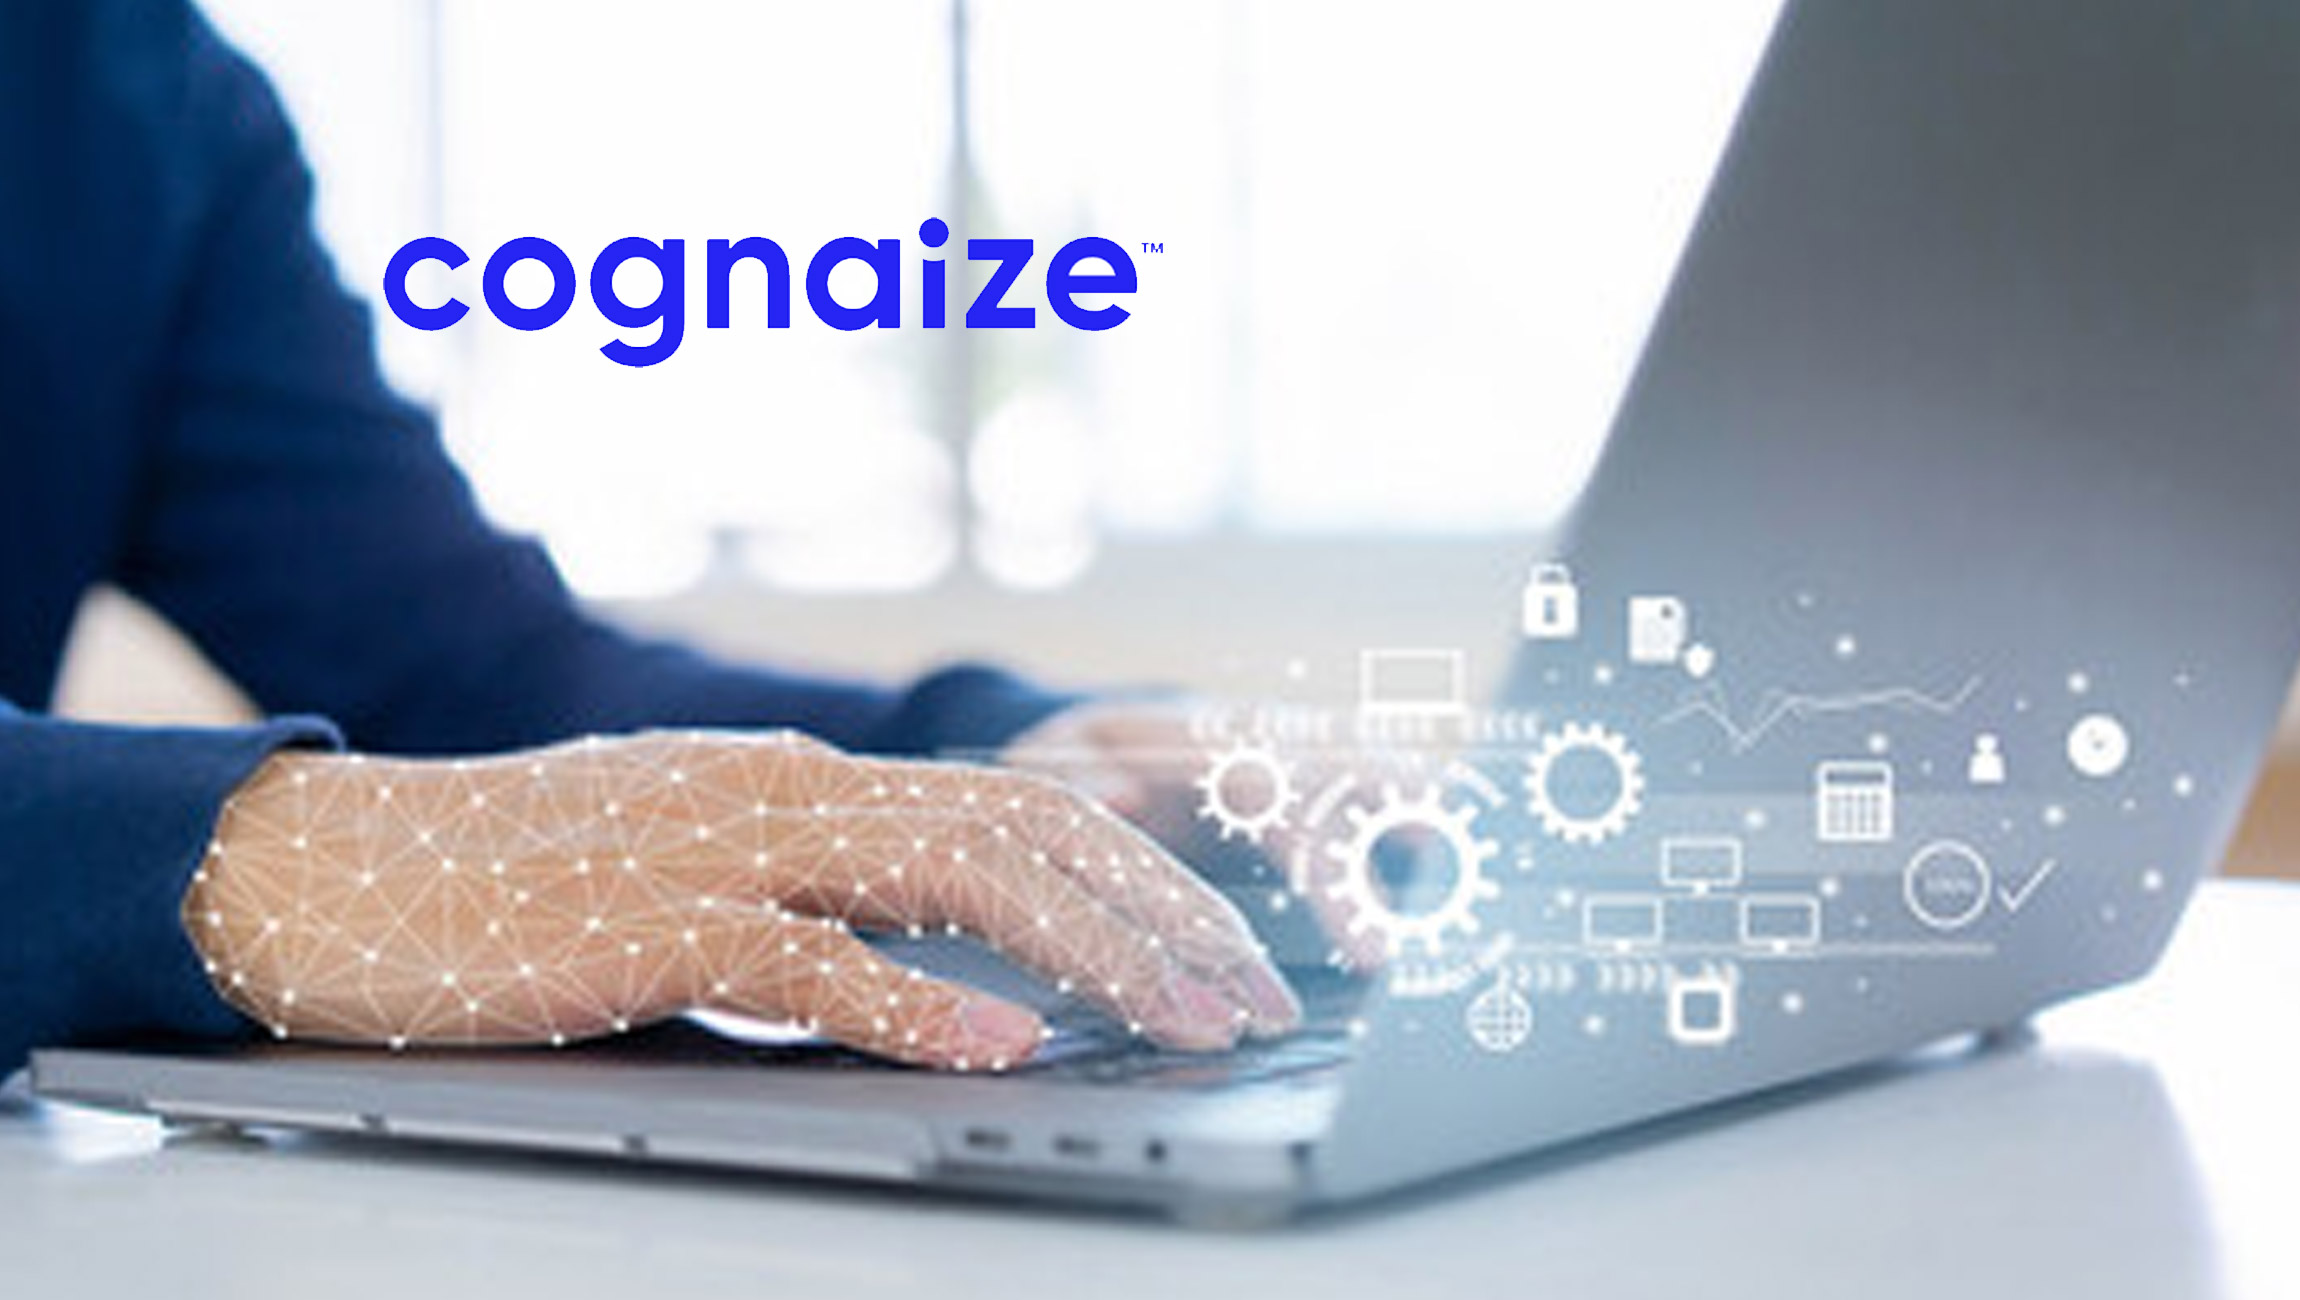 Cognaize Achieves Significant Growth in 2022, Driven by Demand by Global Financial Services Leaders for AI-Powered Intelligent Document Processing